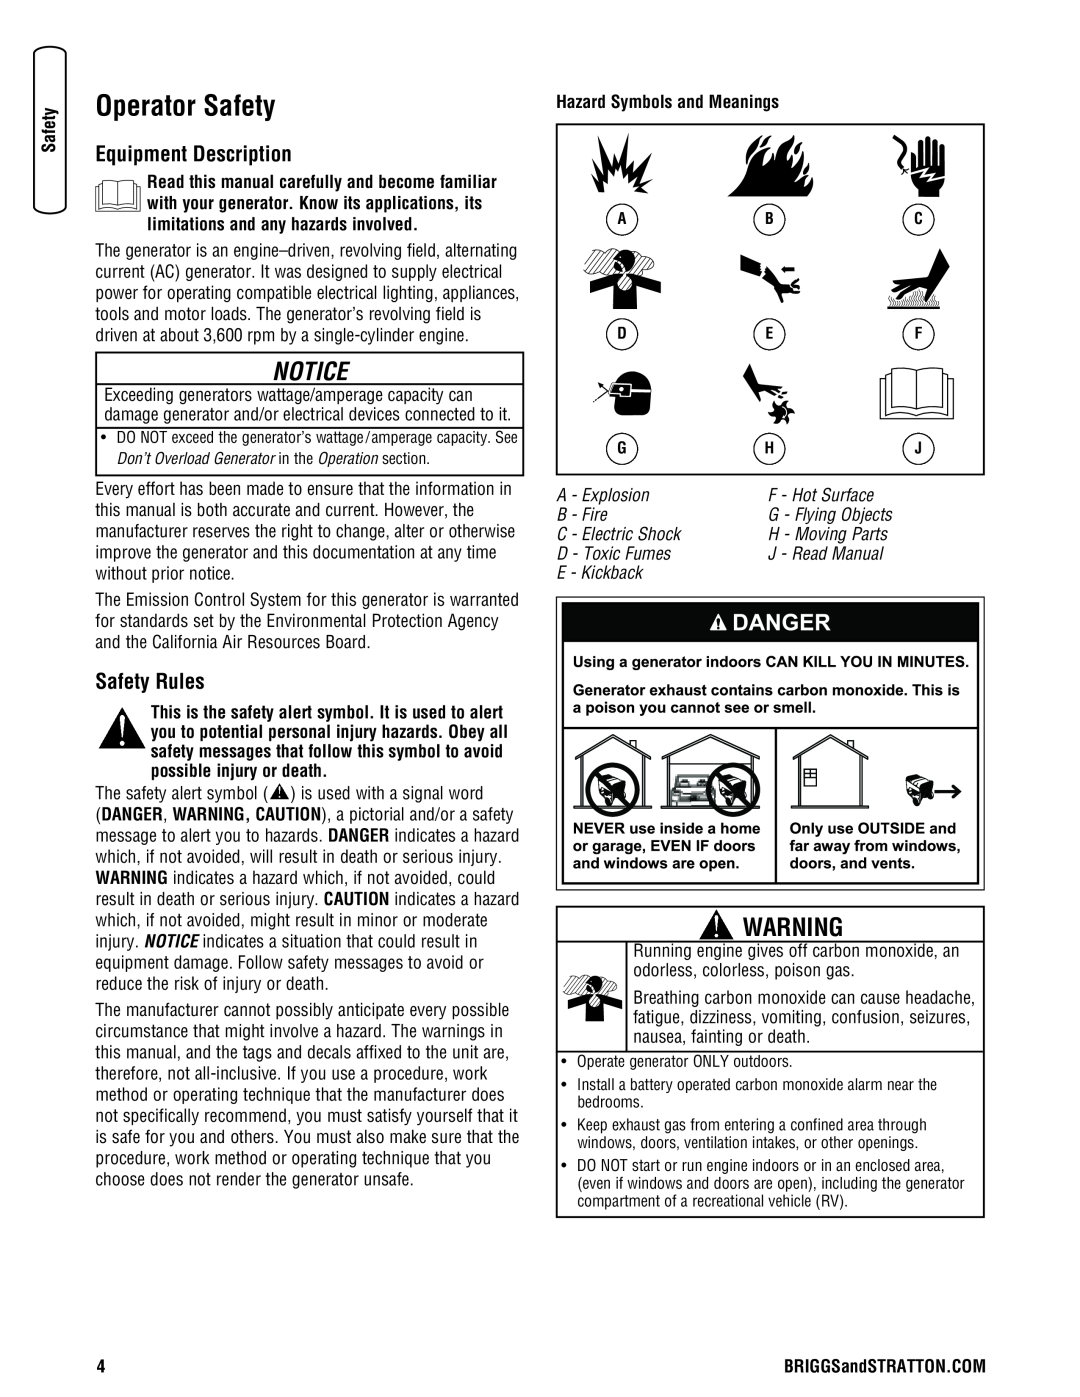 Briggs & Stratton Portable Generator manual Operator Safety, Hazard Symbols and Meanings, A - Explosion, F - Hot Surface 